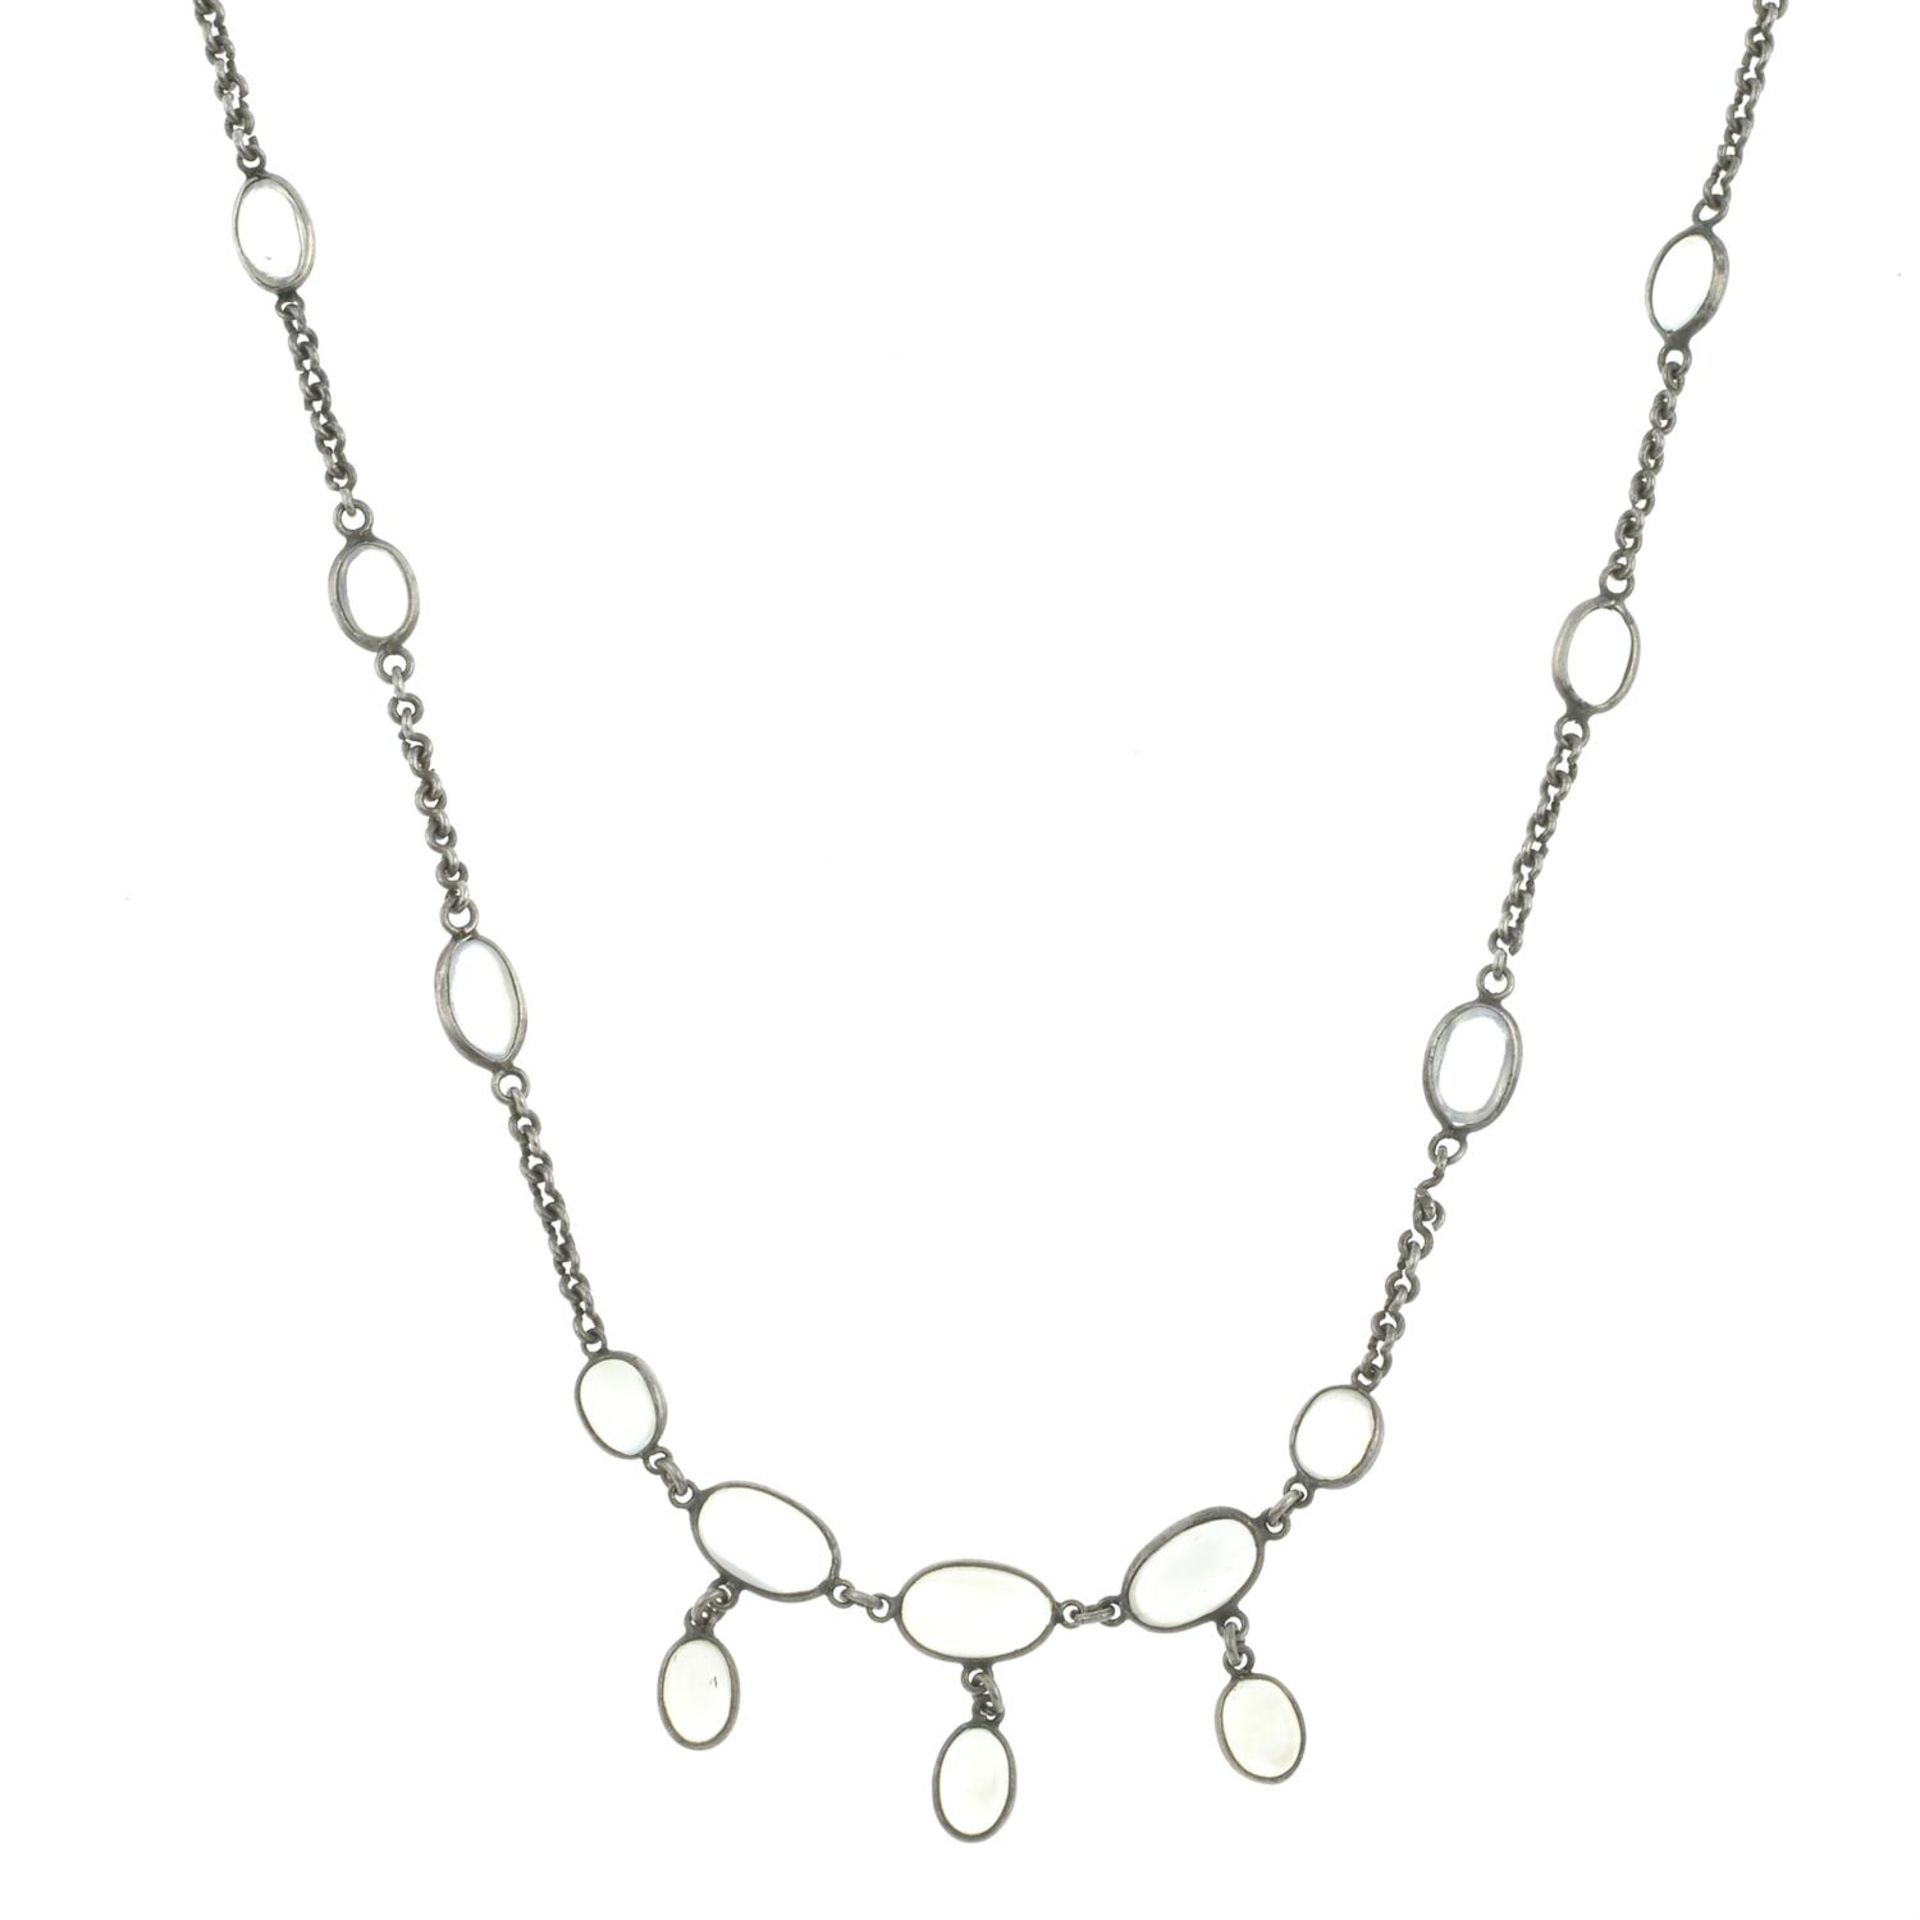 Early 20th century silver moonstone necklace